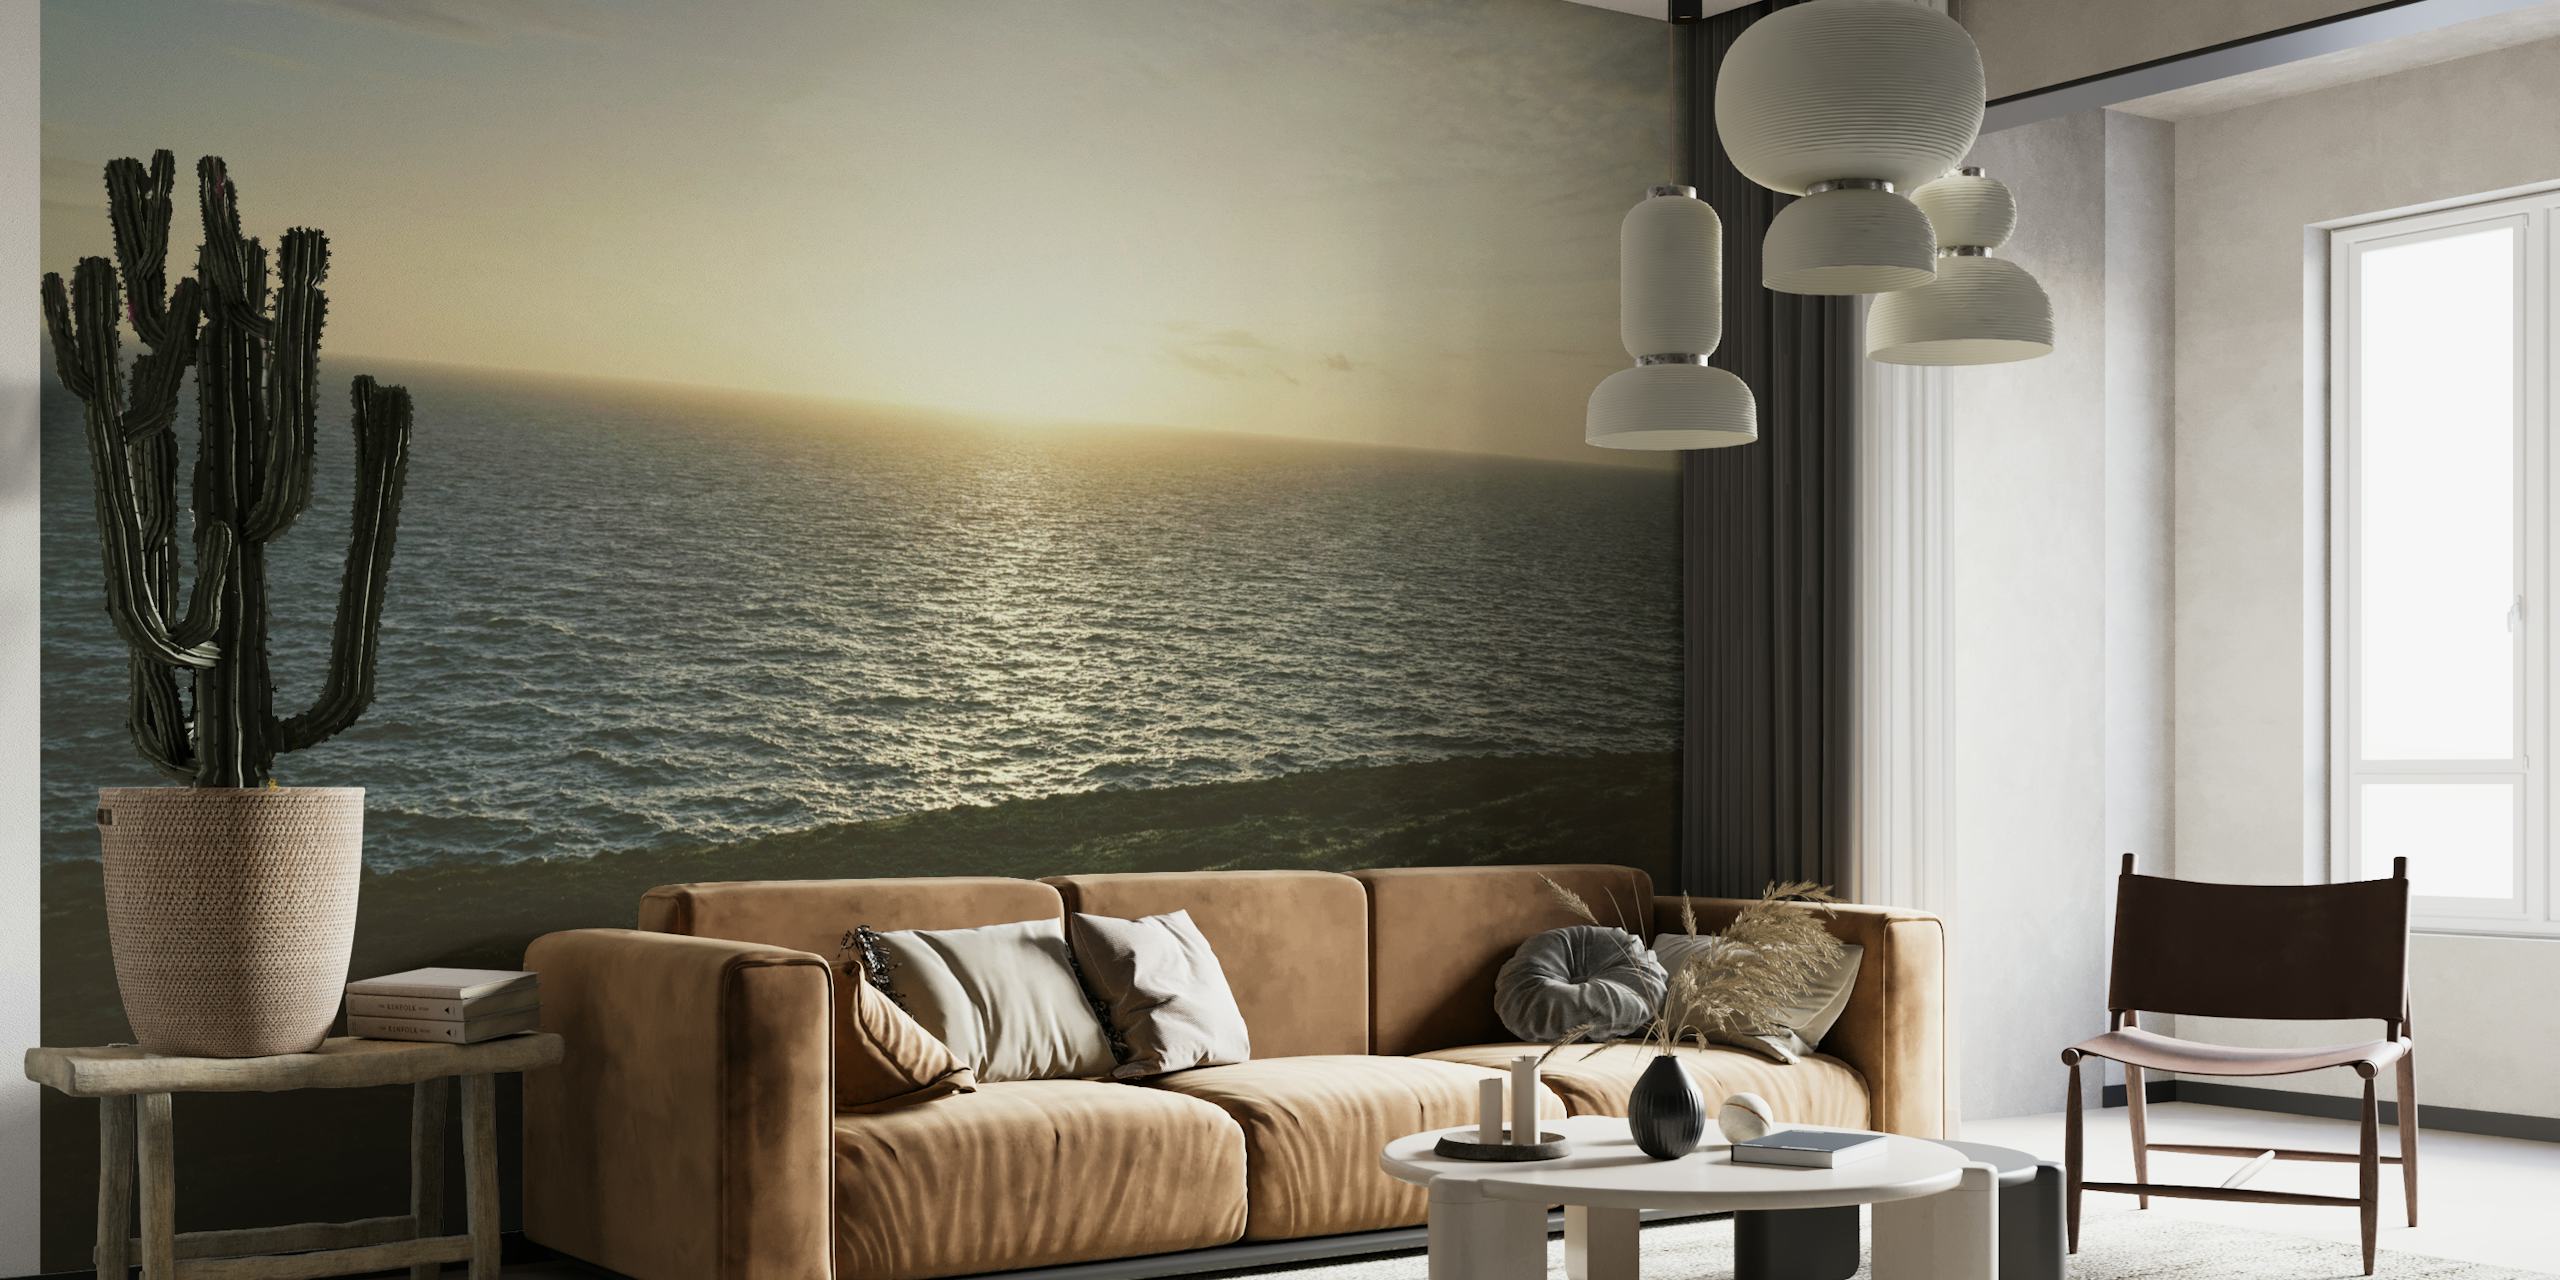 Sunset over sea wall mural with golden hues and calm waters, bringing serenity to any room.